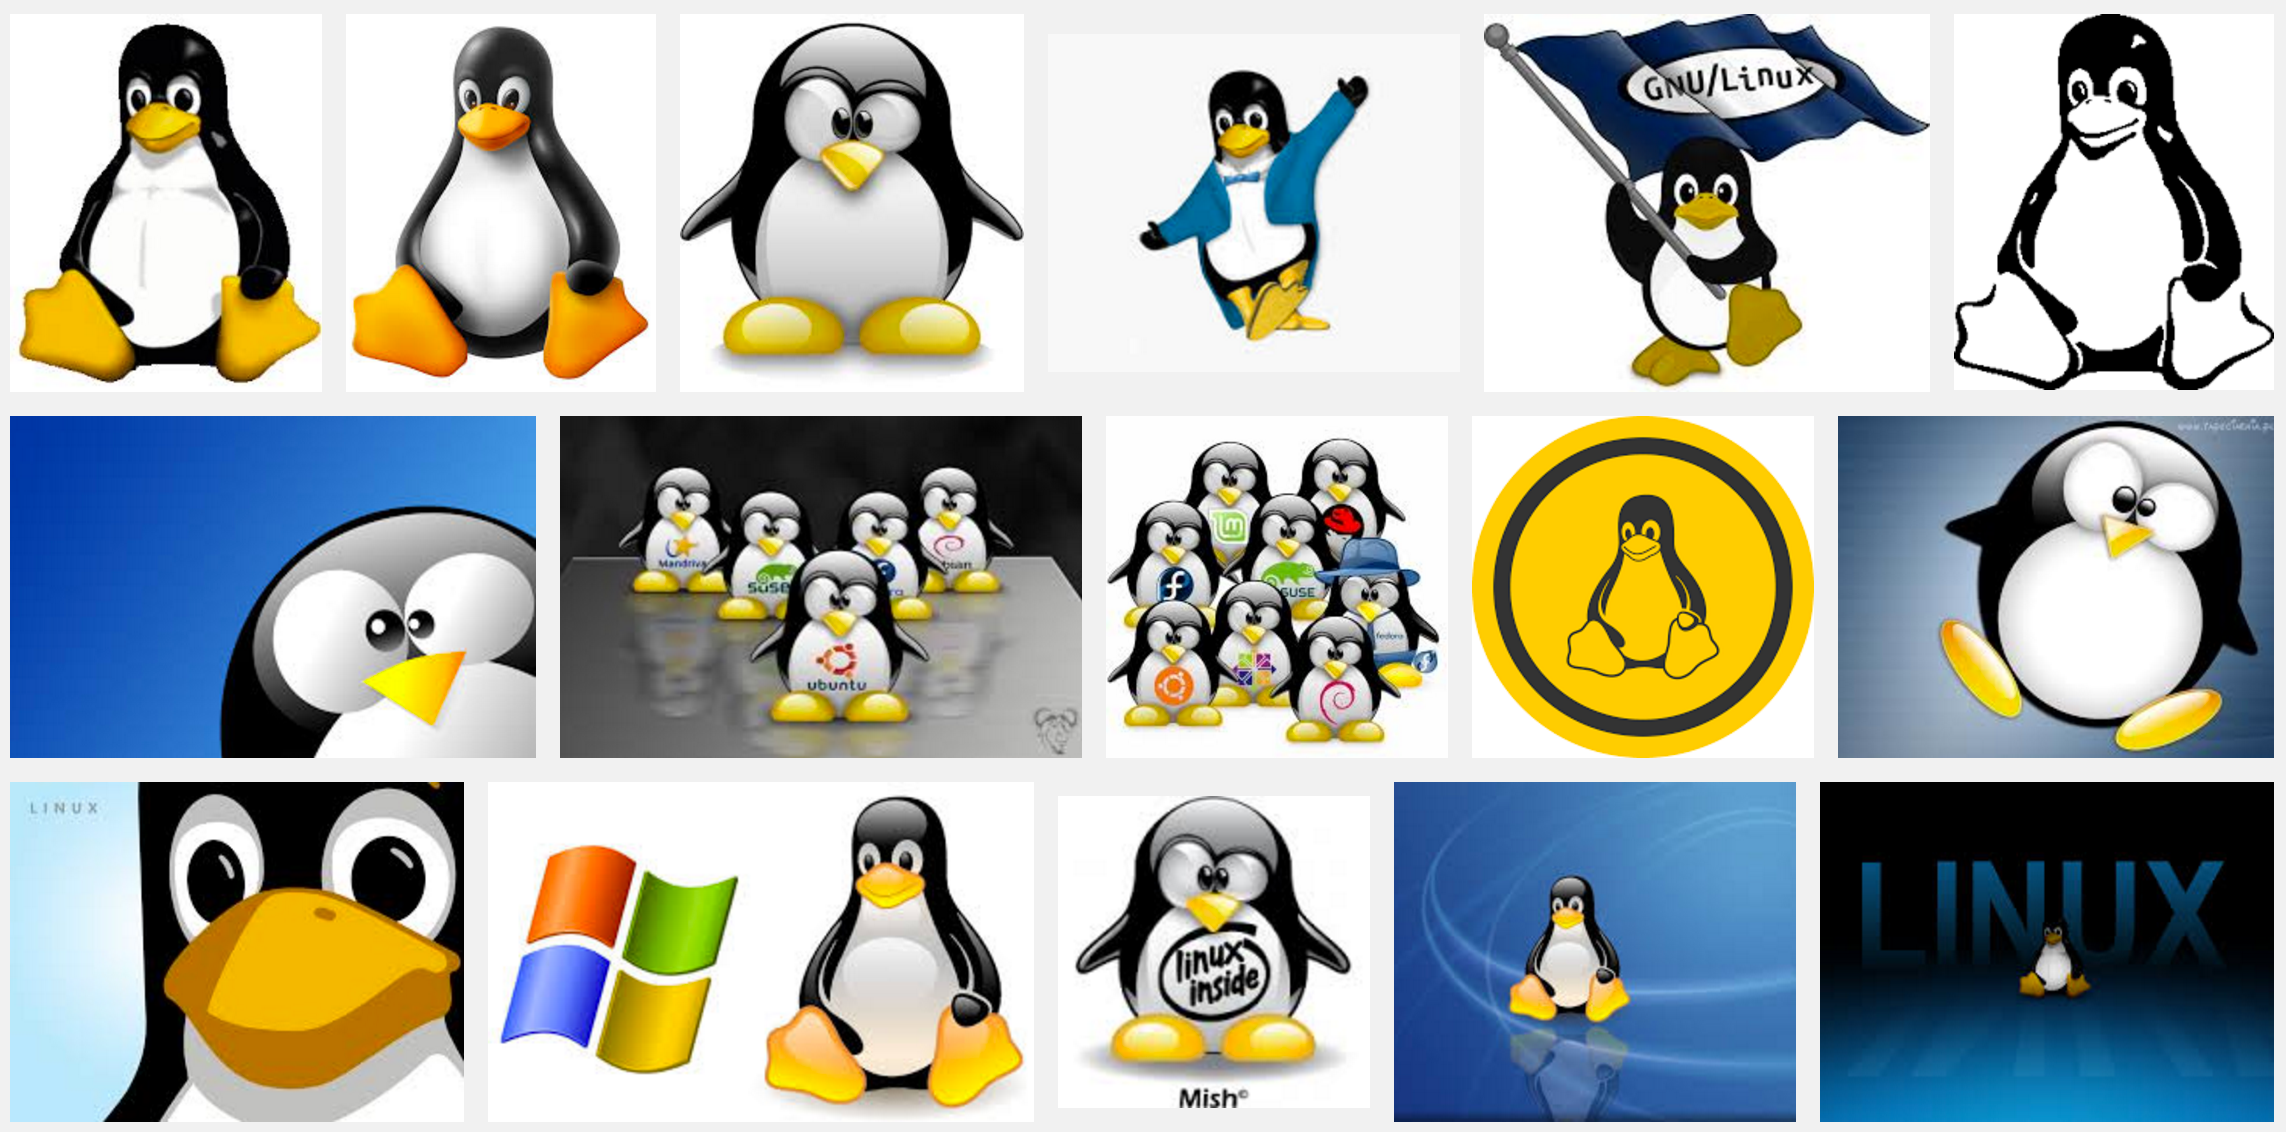 How Tux The Penguin Ruined It For Linux By Jon Hendren Piss Io